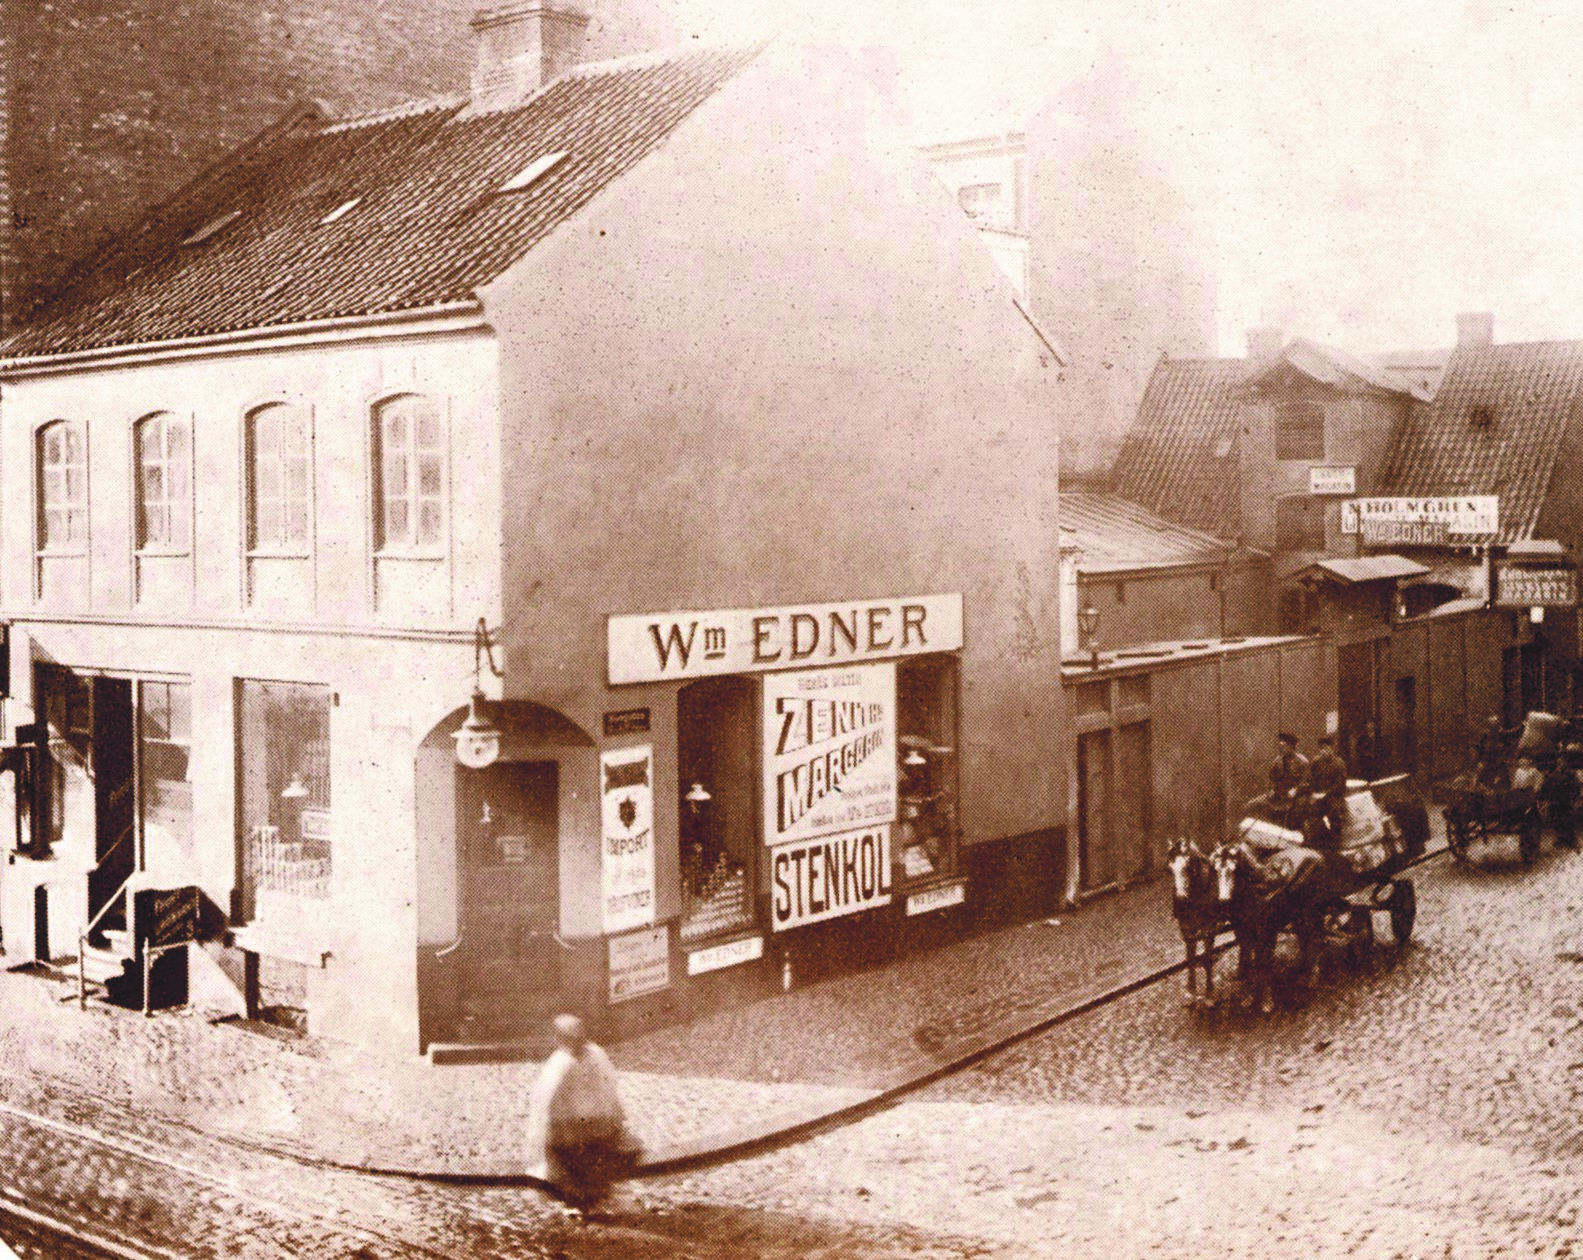 The original store, owned by Wilhelm Edner, where Bona floor wax was first discovered.

Bona’s founder, Wilhelm Edner originally owned a small grocery shop in Malmö, Sweden where coffee was his favourite product. In the shop, he also sold bonvax, an agent which, when applied on the wood floor, created a polished and protective surface. Edner realized the potential of bonvax and incorporated Bona AB in 1919. Now, 100 years later, Bona is the foremost leader in the hardwood floor industry with a wealth of innovation and knowledge all focused on bringing out the beauty in floors. 